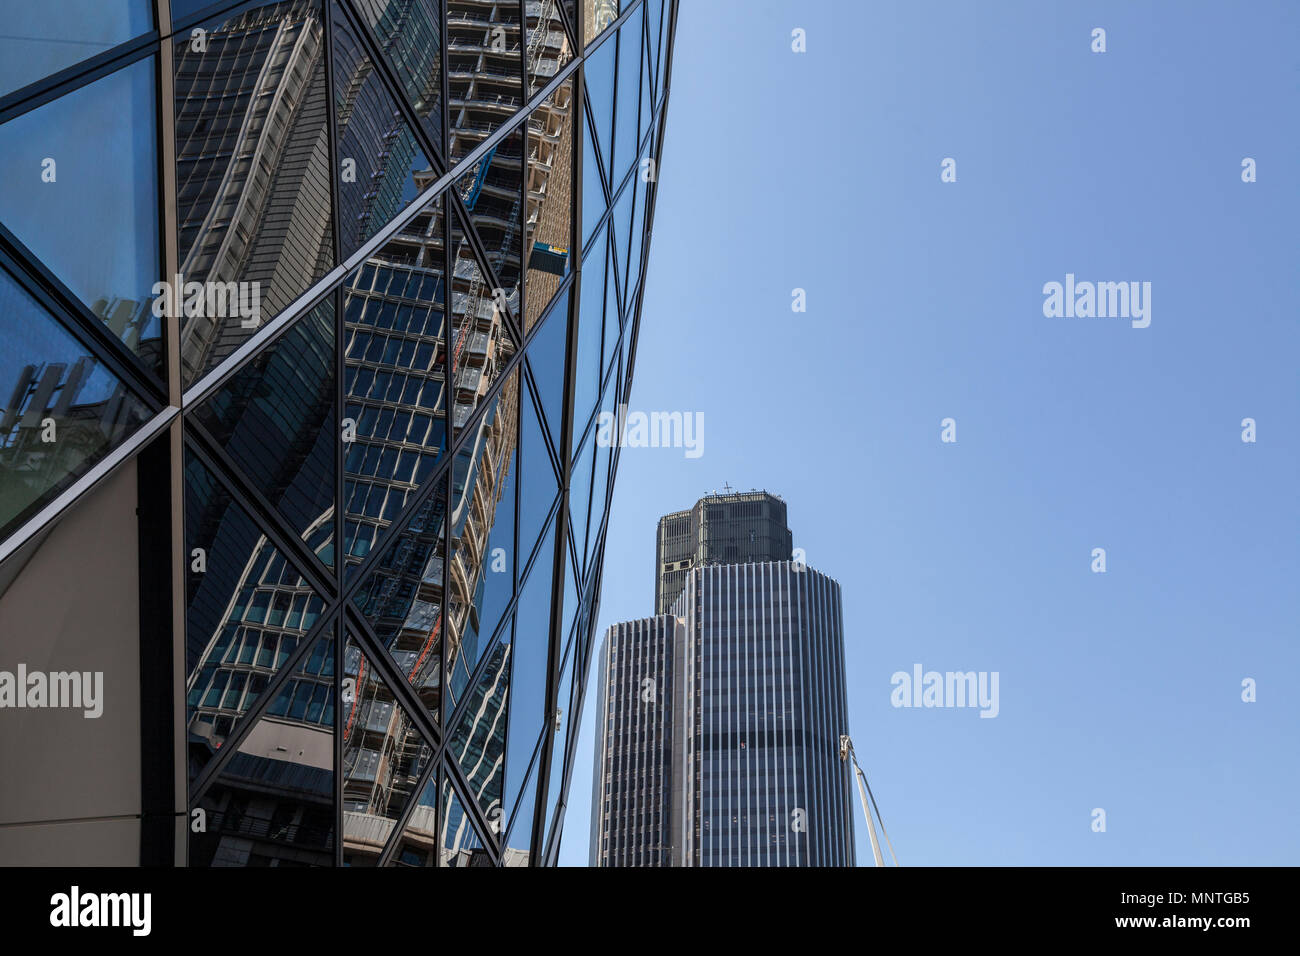 The Gherkin building with Tower 42, formerly the Natwest Tower, in the background in London Stock Photo